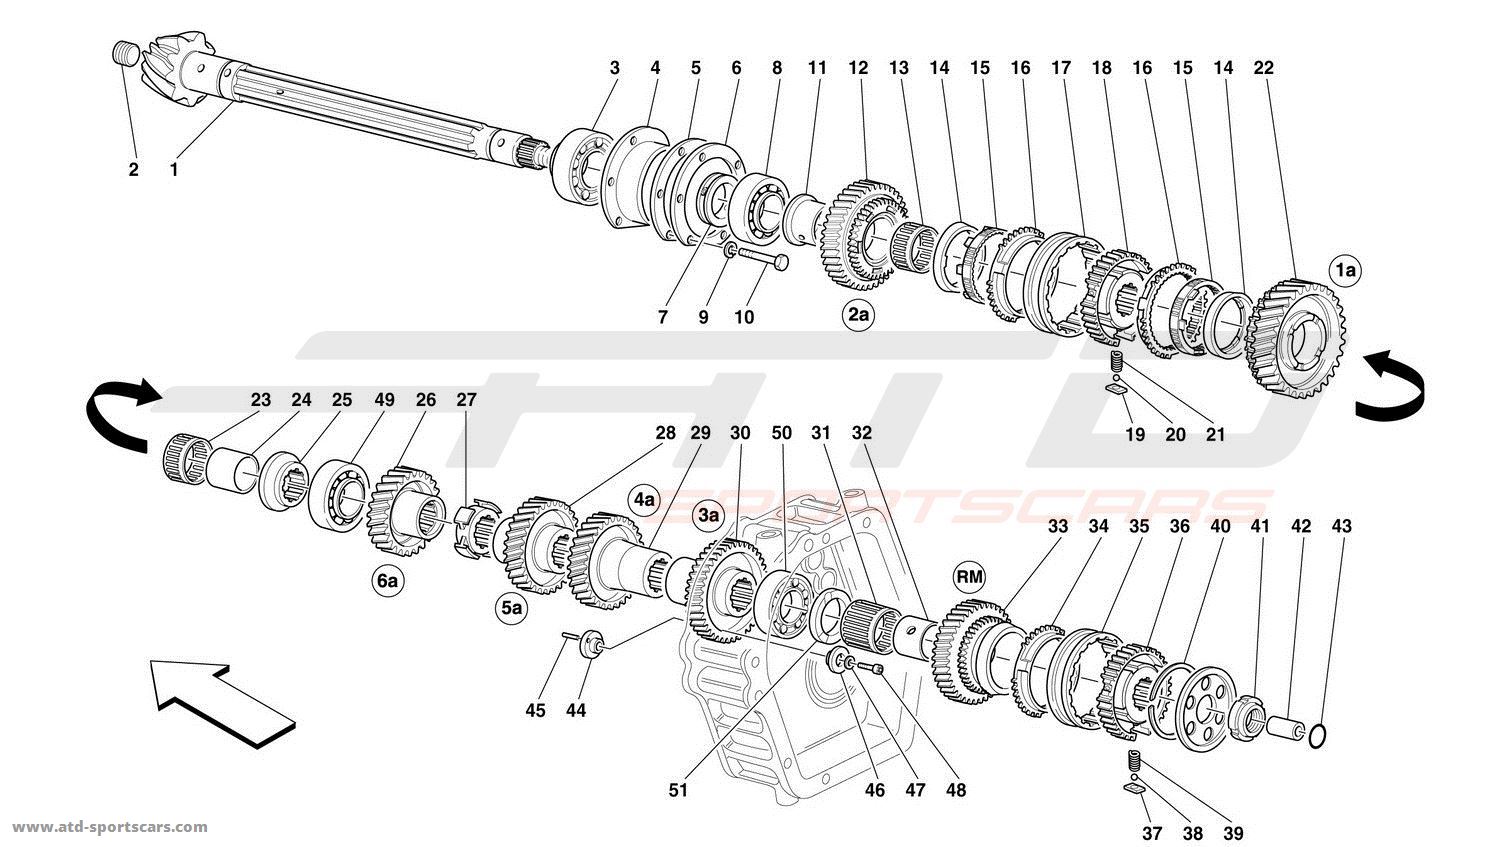 GEARBOX LAY SHAFT